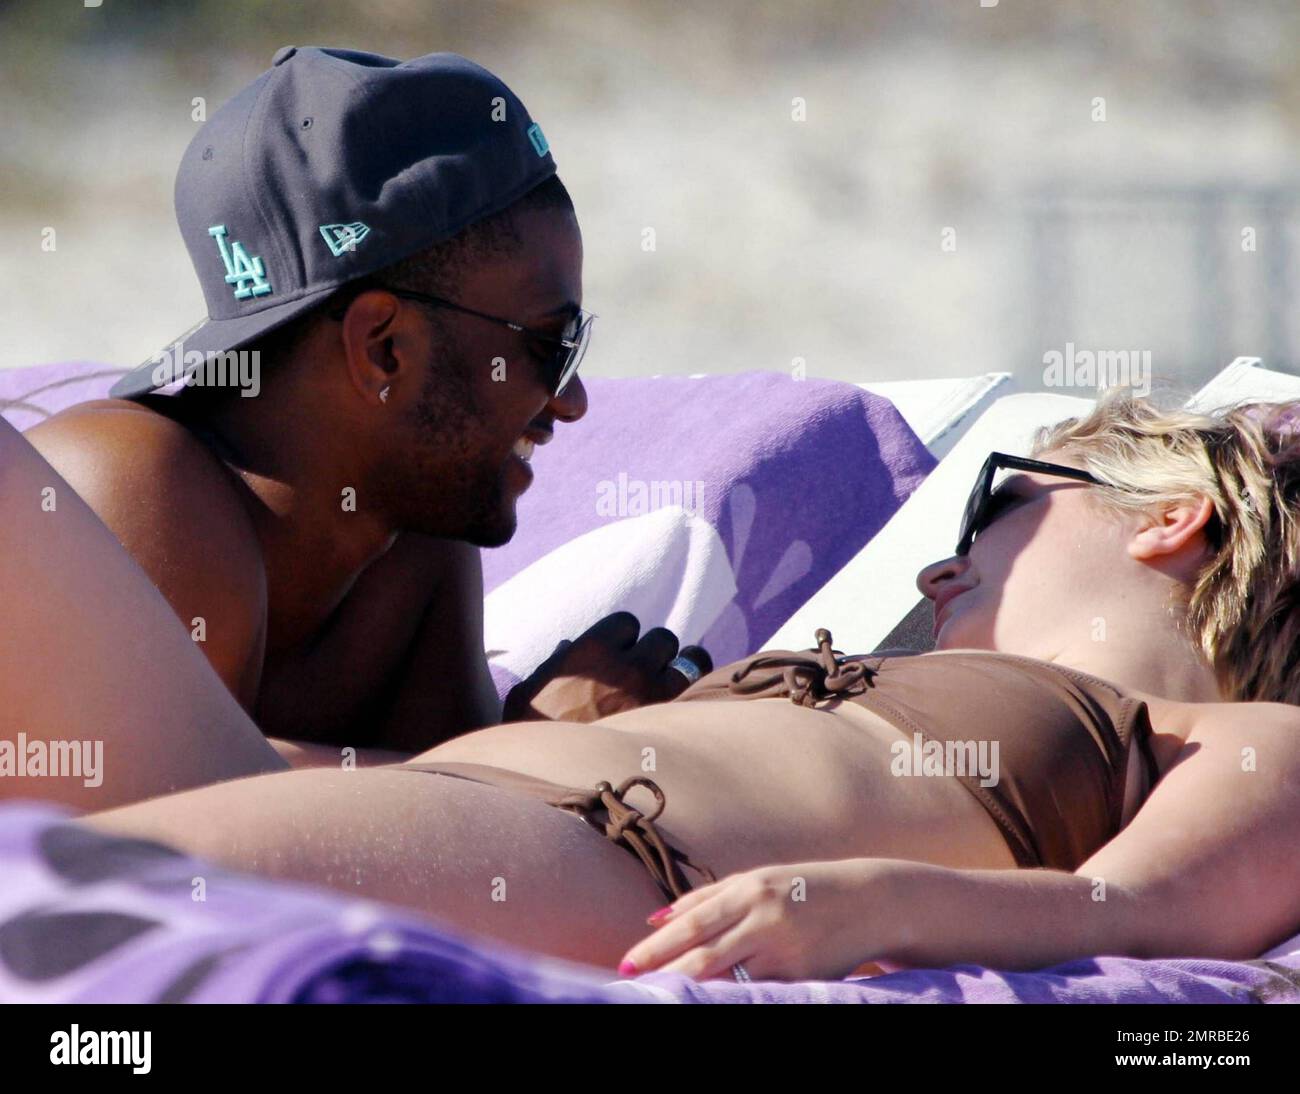 JLS singer JB Gill shares a tender moment with girlfriend Chloe Tangney while relaxing in the warm South Florida sun on Miami Beach. JB and the rest of the band are celebrating the end of their sold-out UK arena tour with a much-deserved holiday. Miami Beach, FL. 2/4/11. Stock Photo